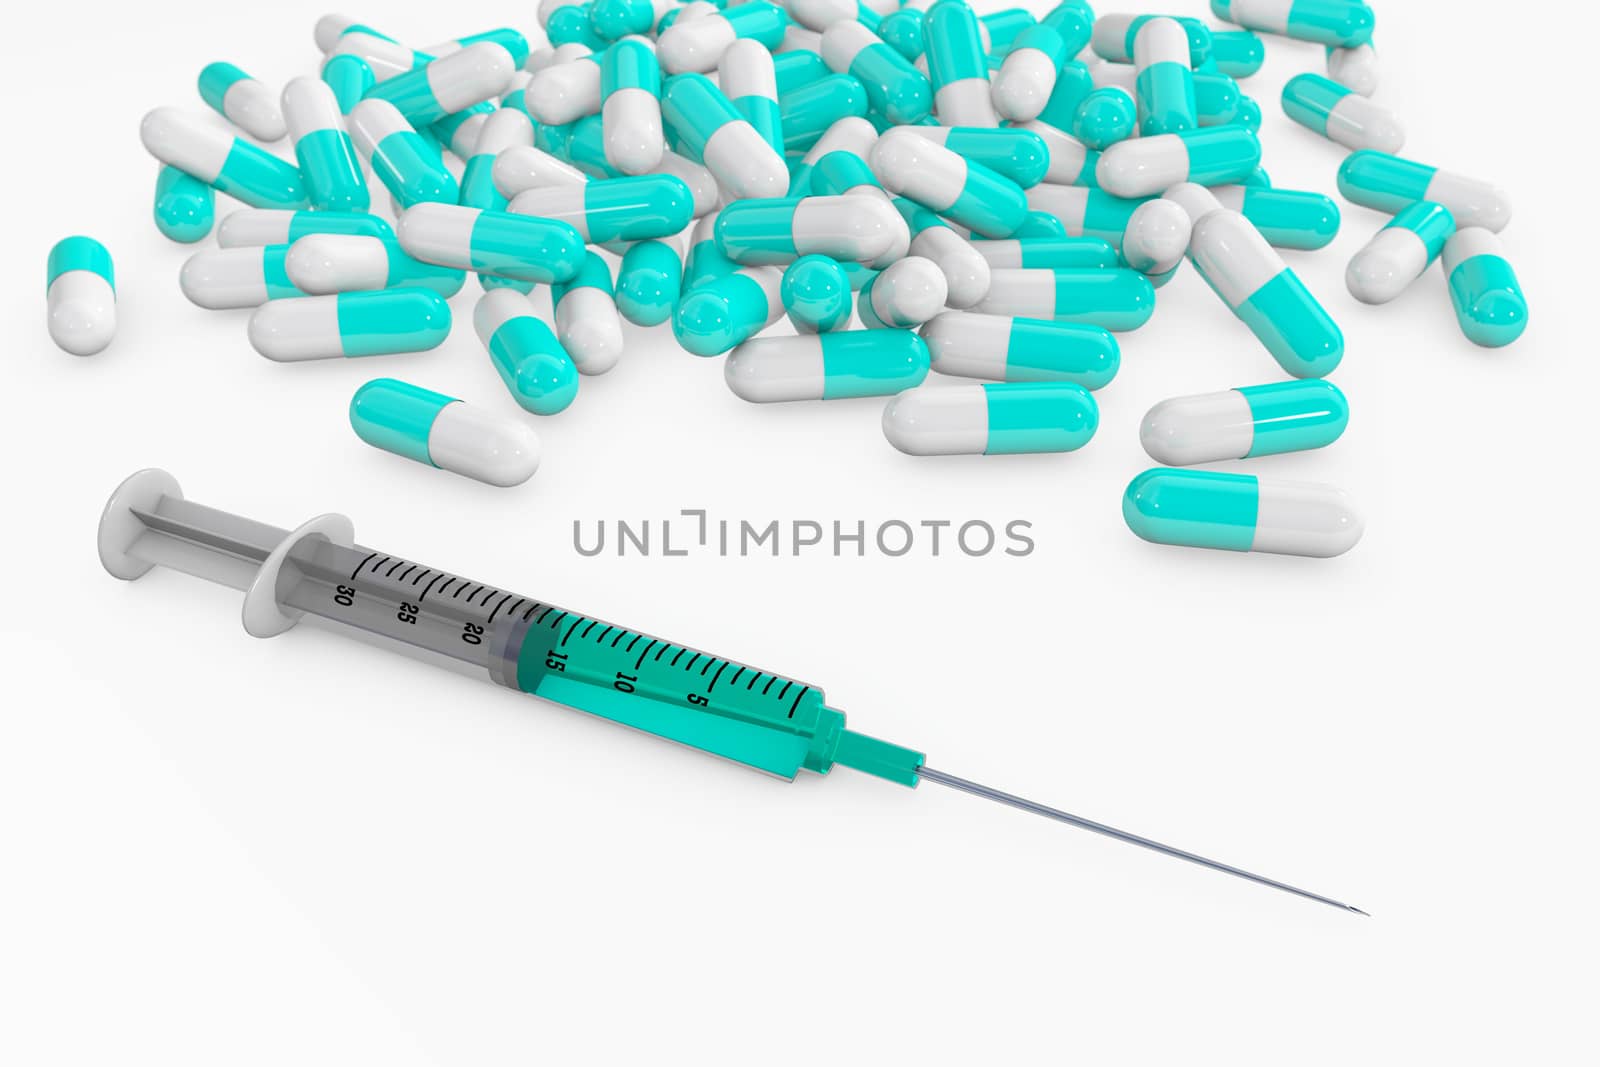 syringe with pills 3d rendering medicine concept by F1b0nacci